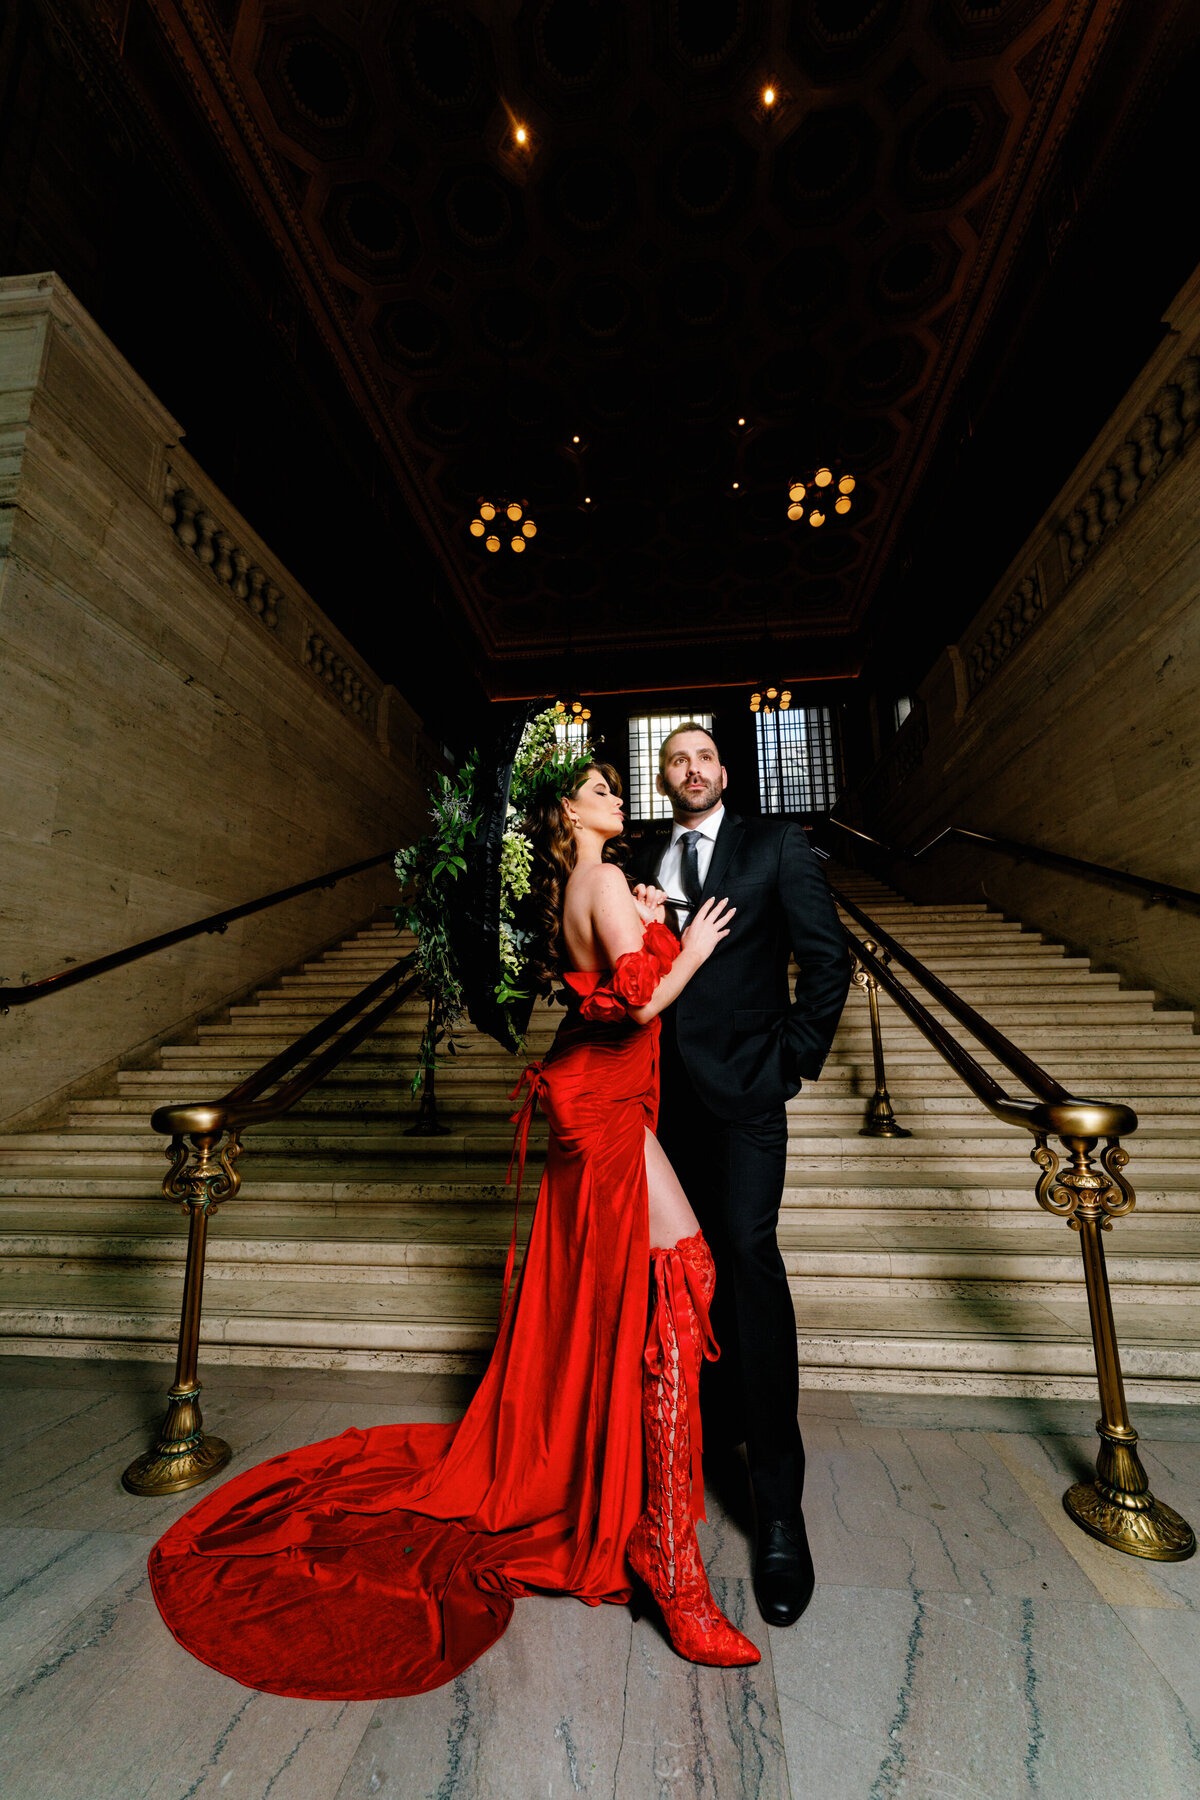 Aspen-Avenue-Chicago-Wedding-Photographer-Union-Station-Chicago-Theater-Engagement-Session-Timeless-Romantic-Red-Dress-Editorial-Stemming-From-Love-Bry-Jean-Artistry-The-Bridal-Collective-True-to-color-Luxury-FAV-9